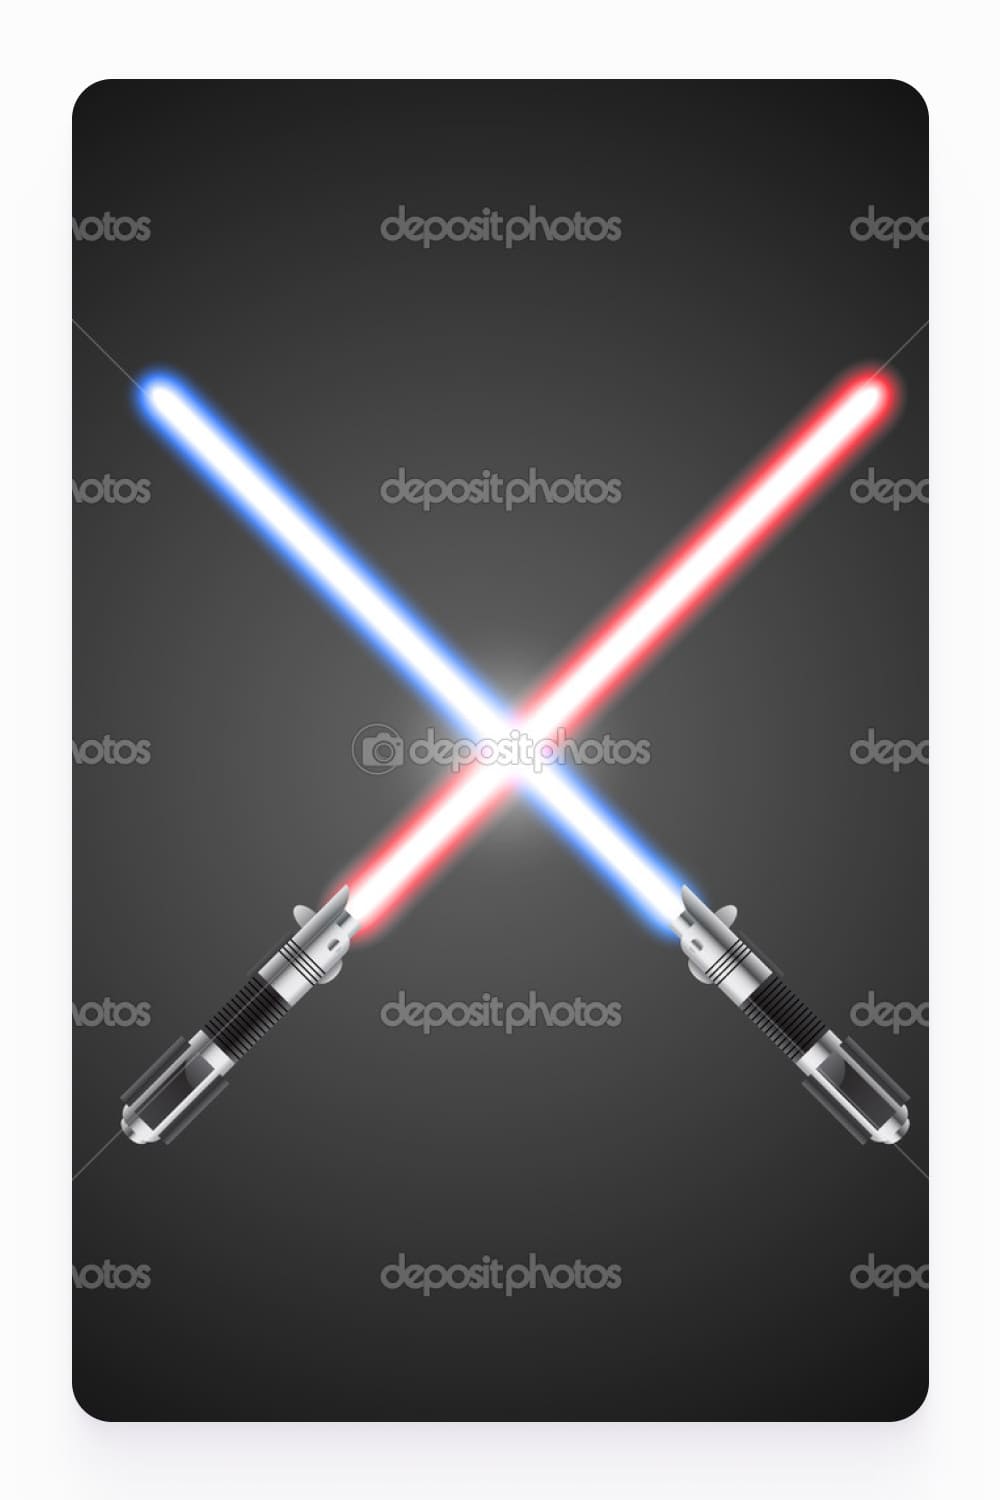 Crossed red and blue lightsabers.